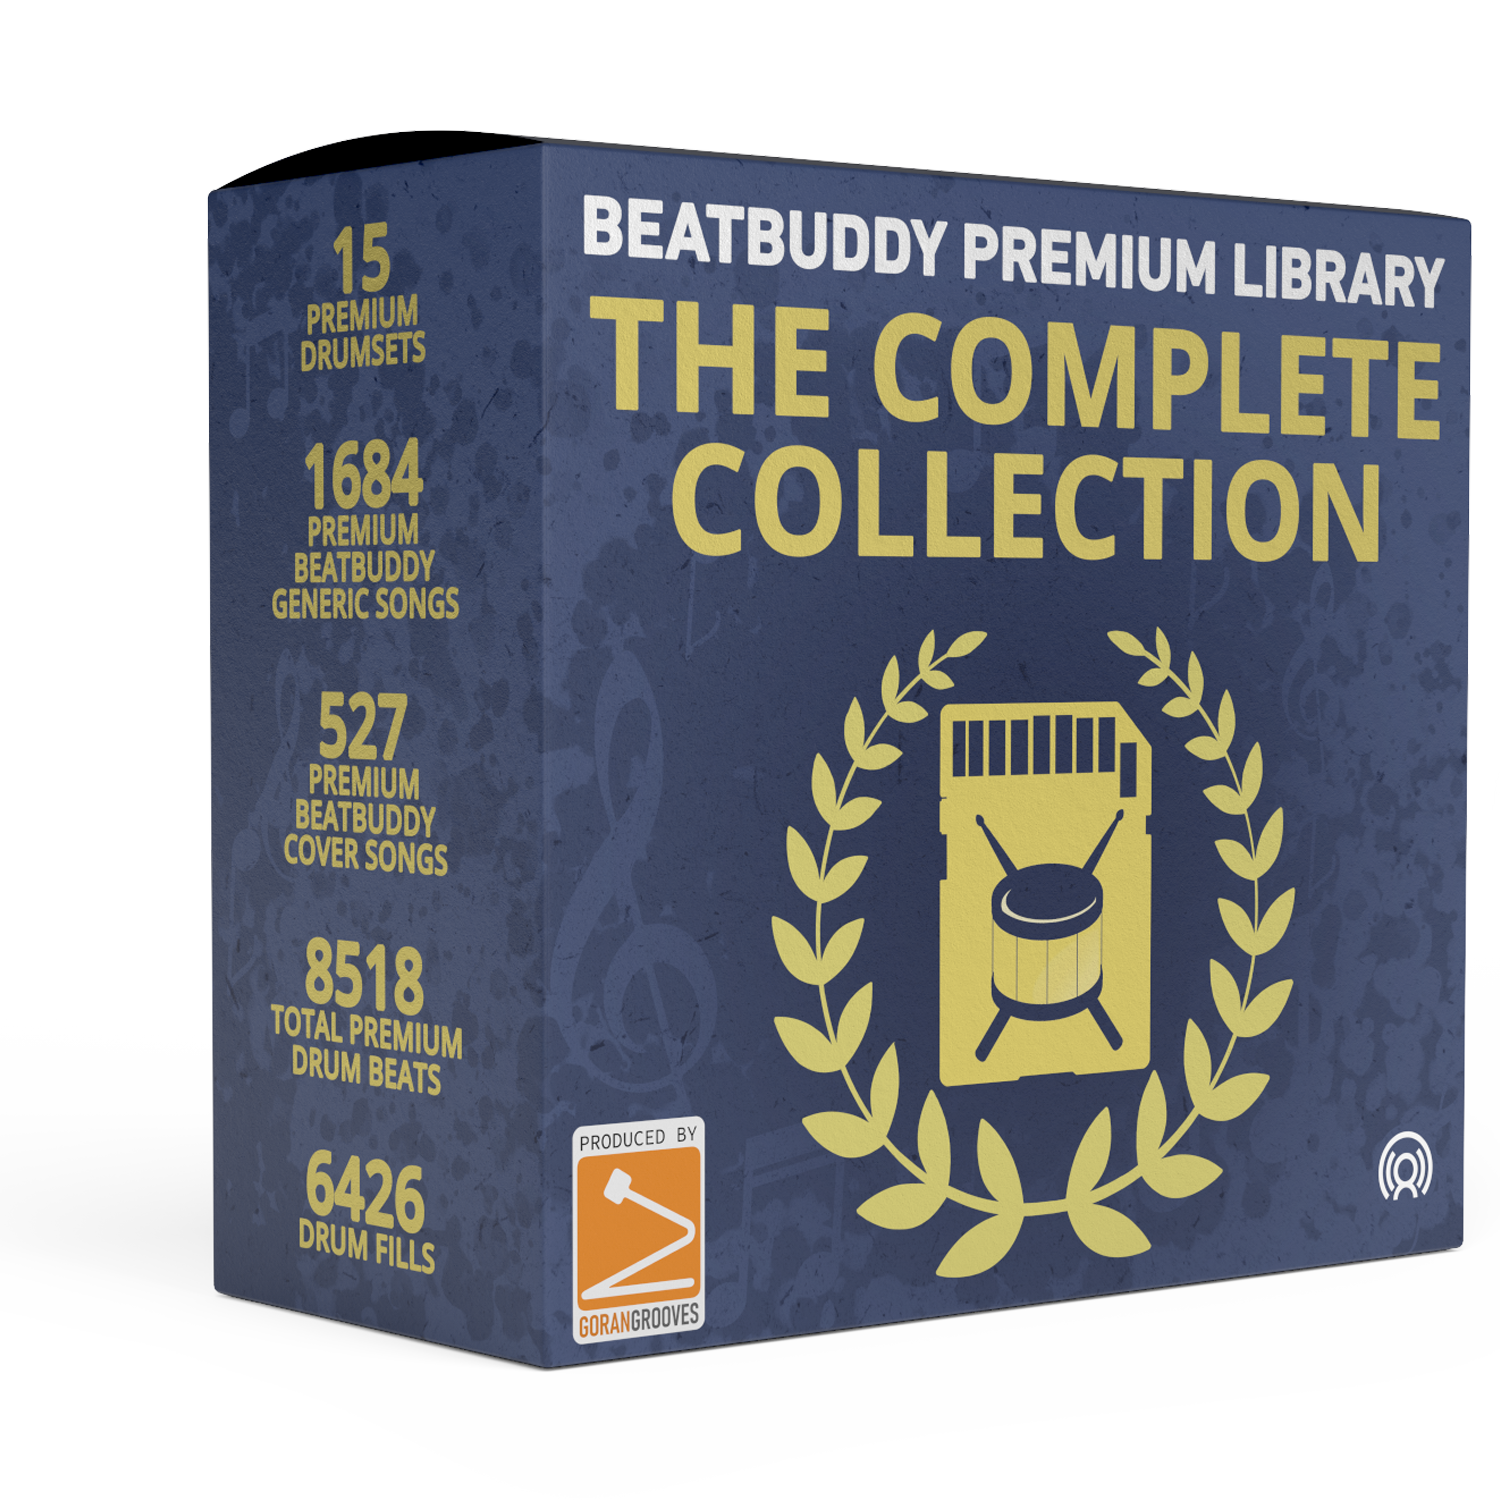 Premium Library SD Card: Complete Collection + Groove Monkee